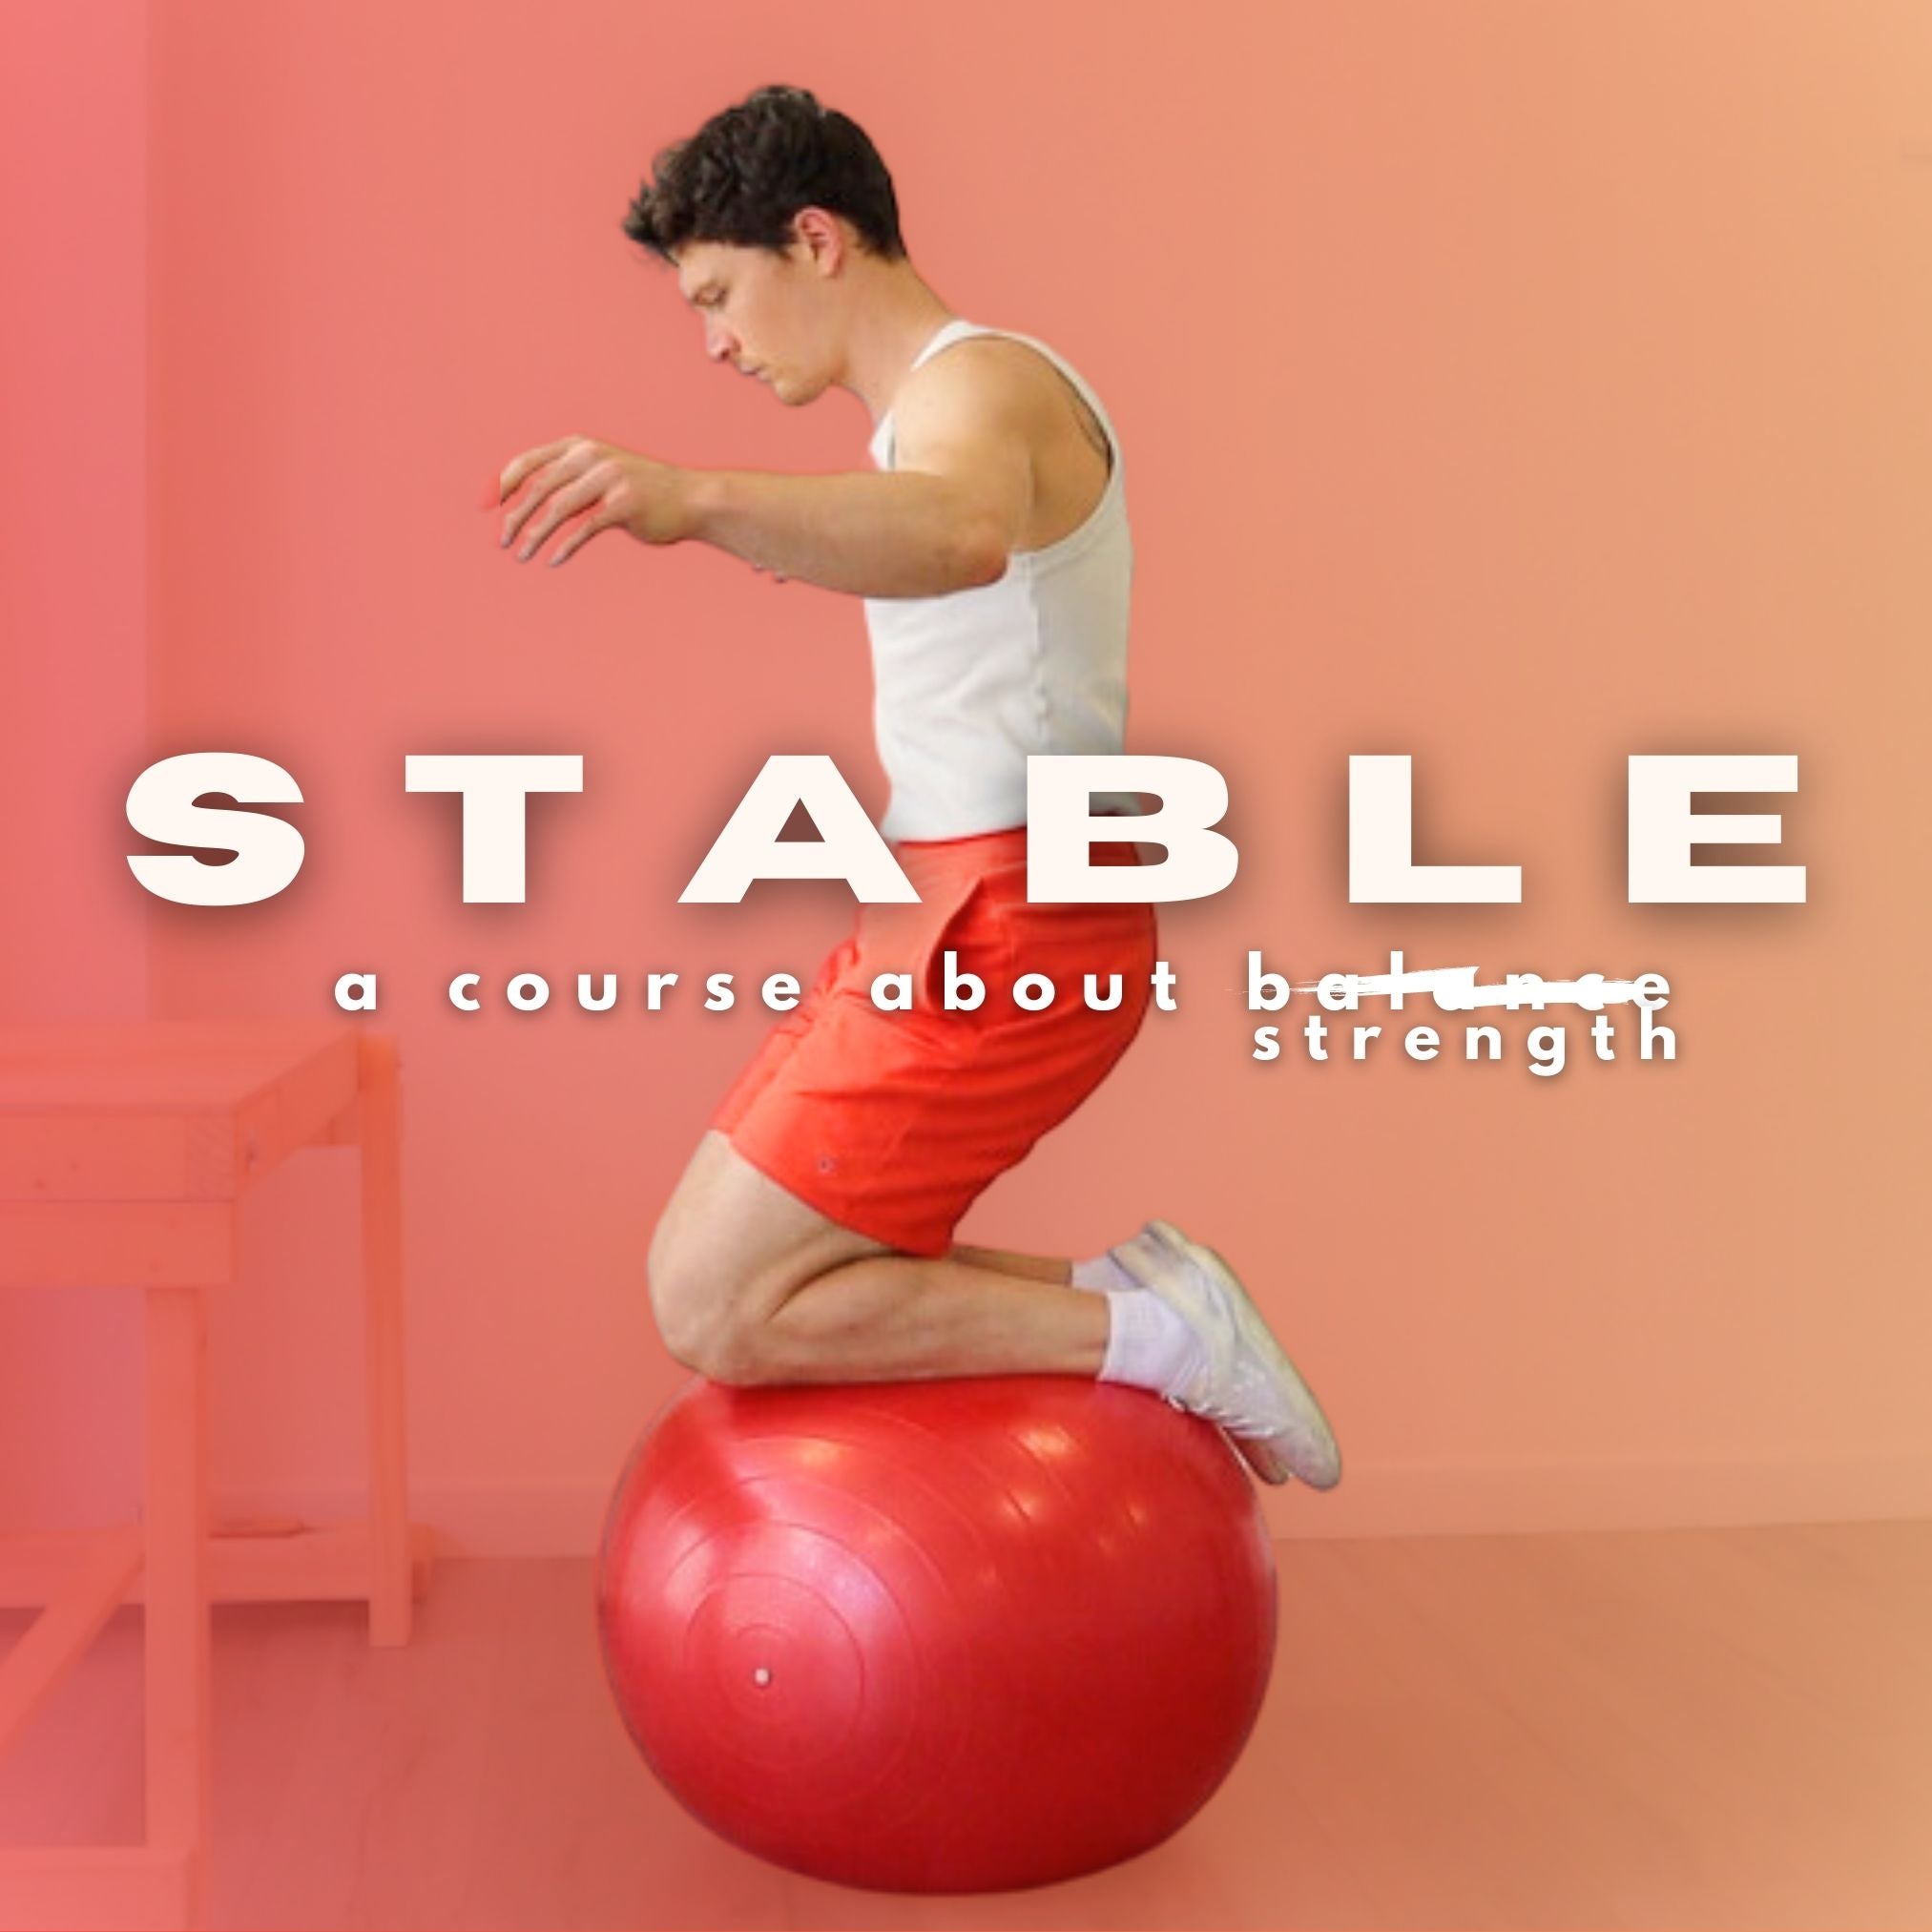 STABLE – Stability course